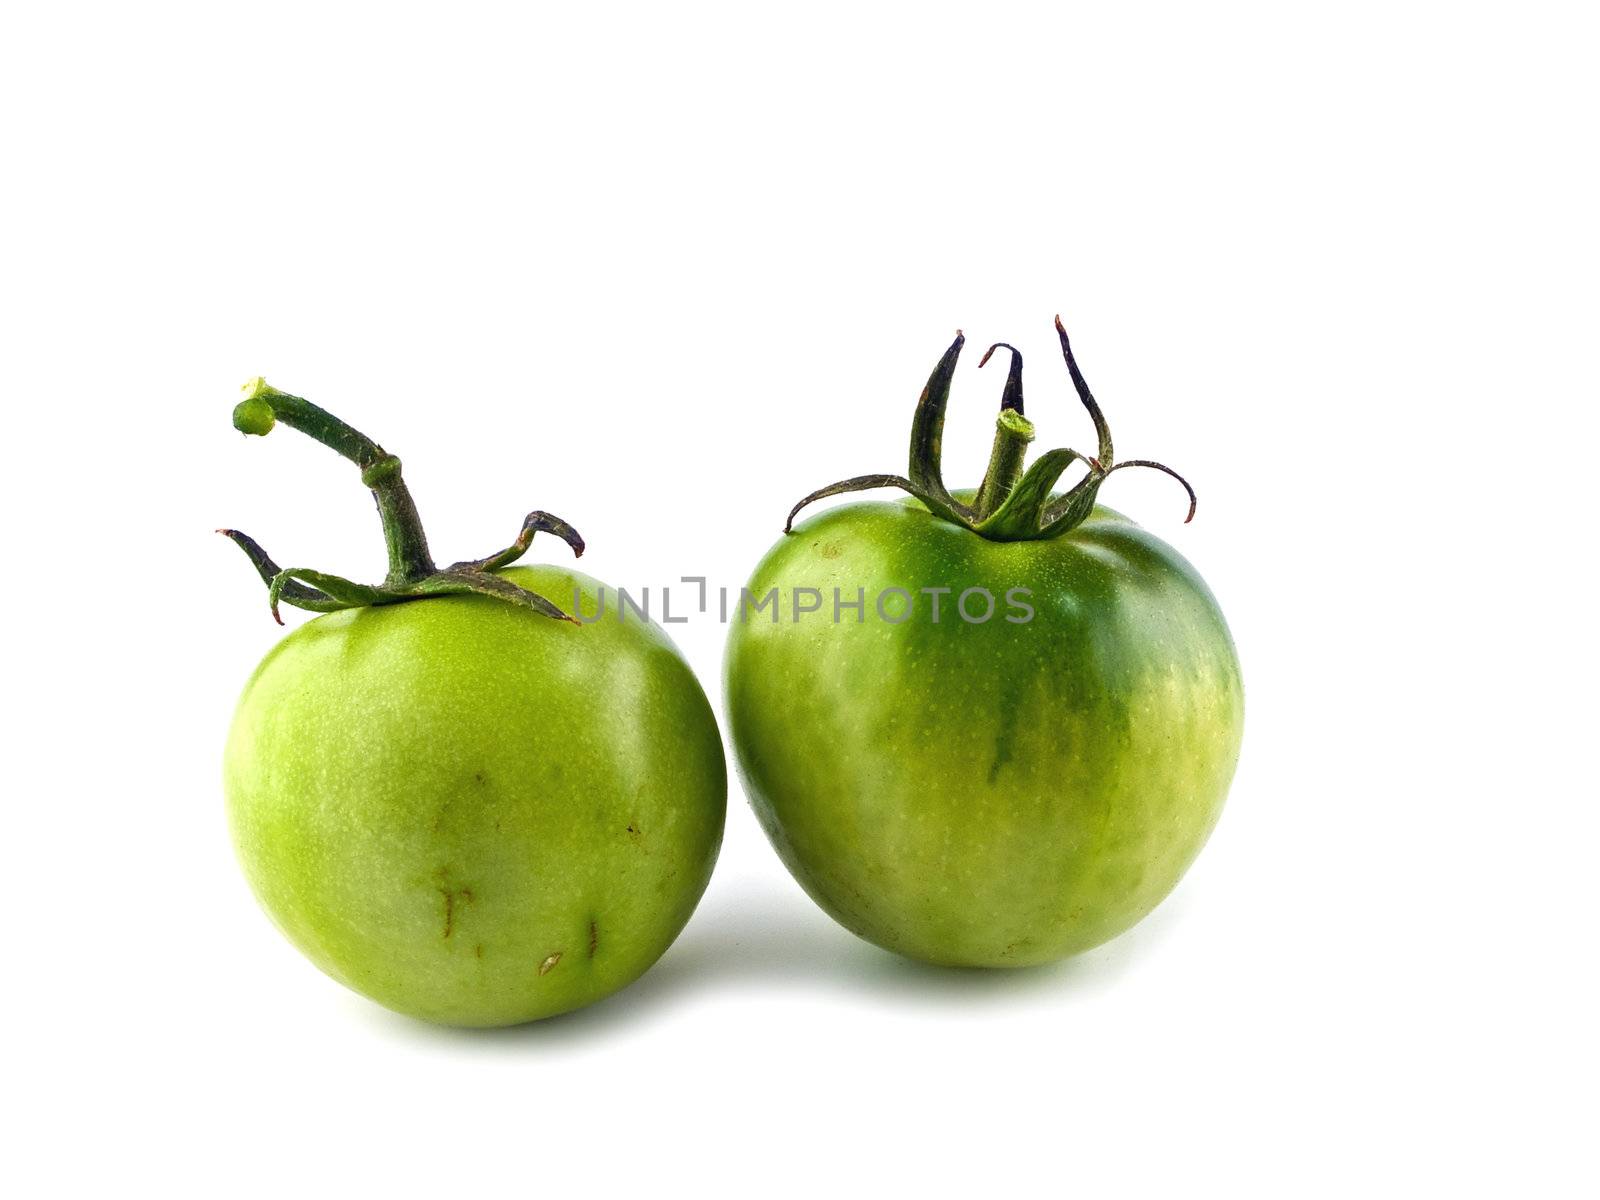 Two Green, Unripened Tomatoes Isolated oh White